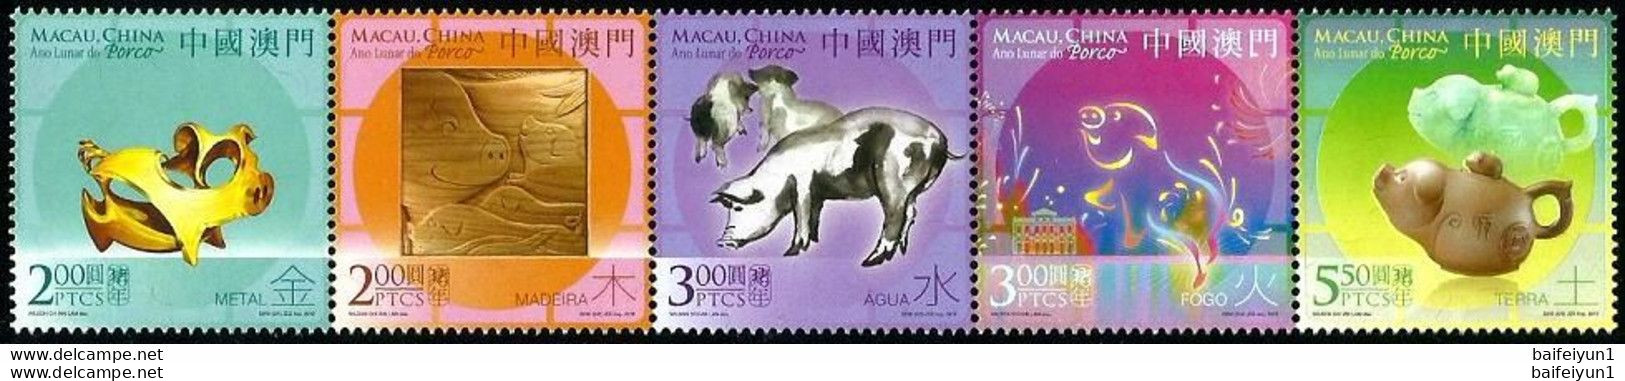 Macau 2019 China New Year Zodiac Of Pig Stamps 5v+ S/S Hologram - Hologramme